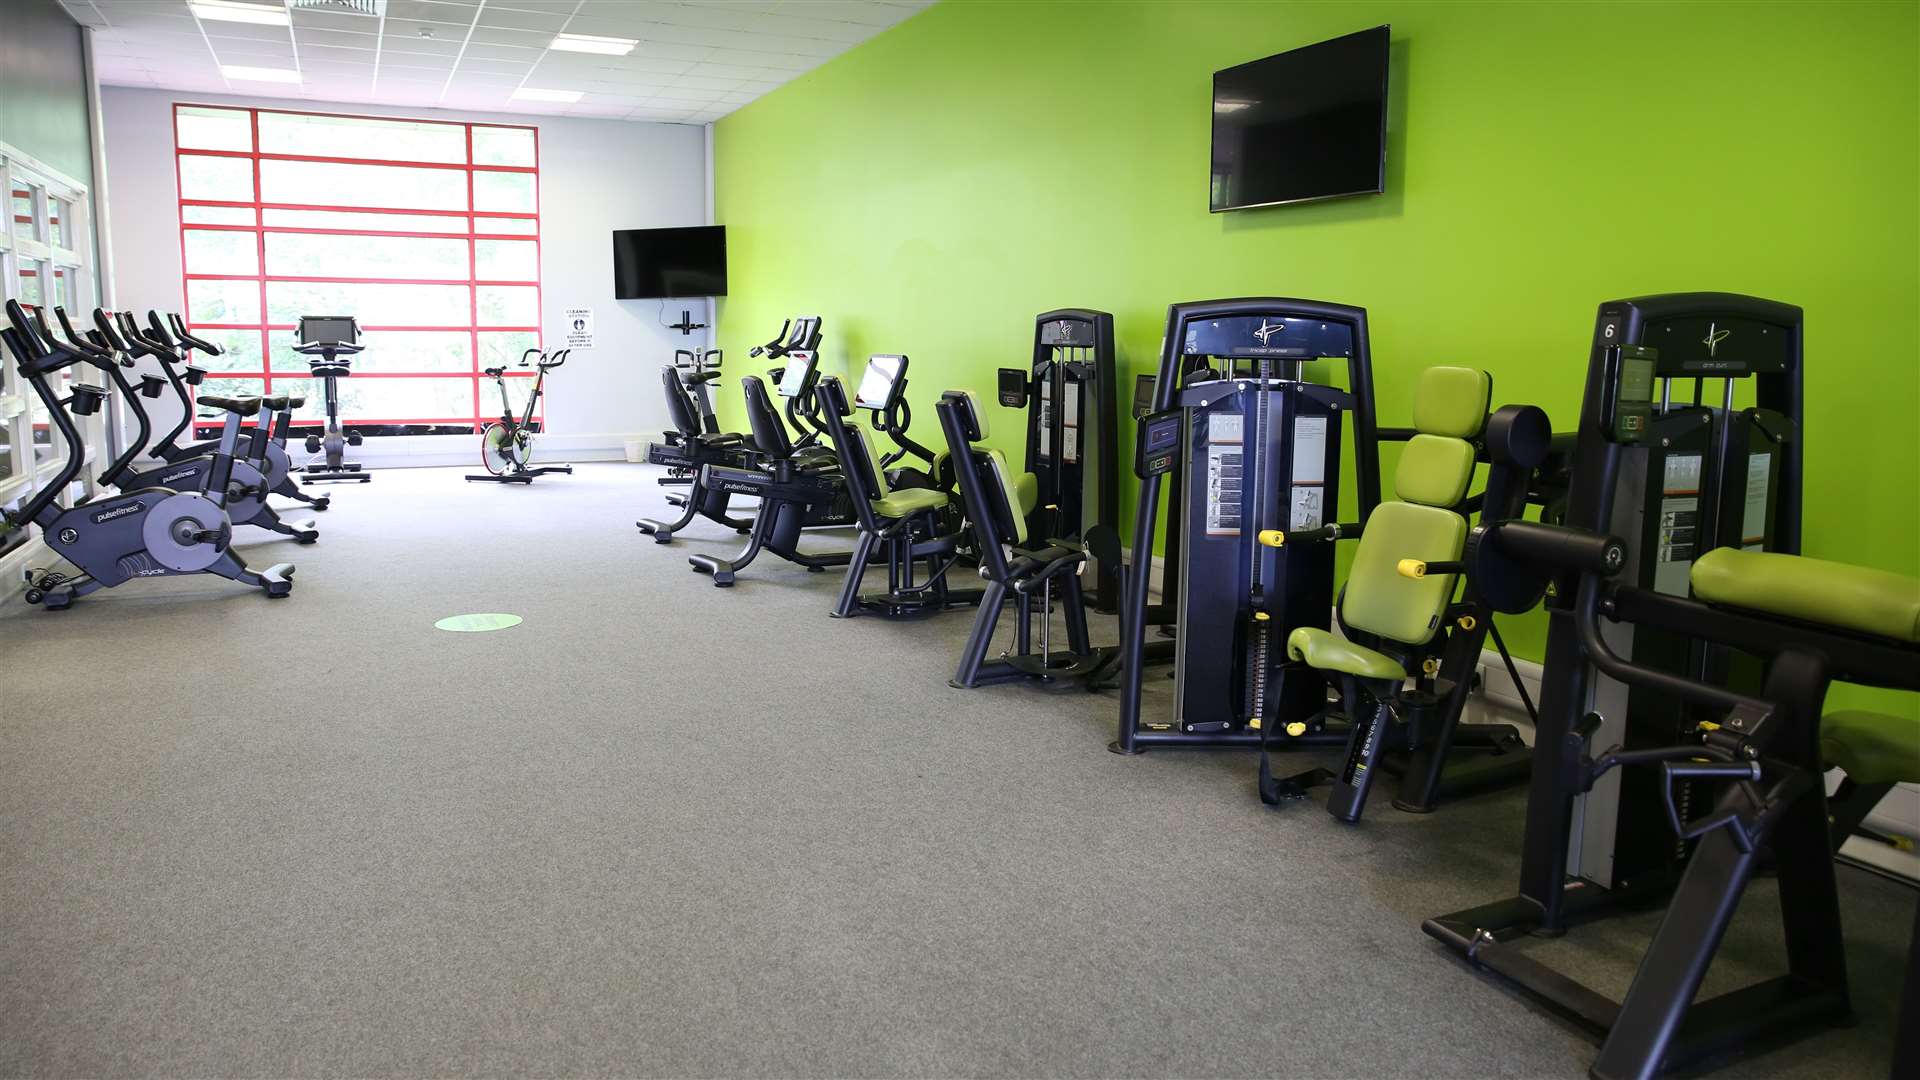 Cascades leisure centre in Gravesend has reopened